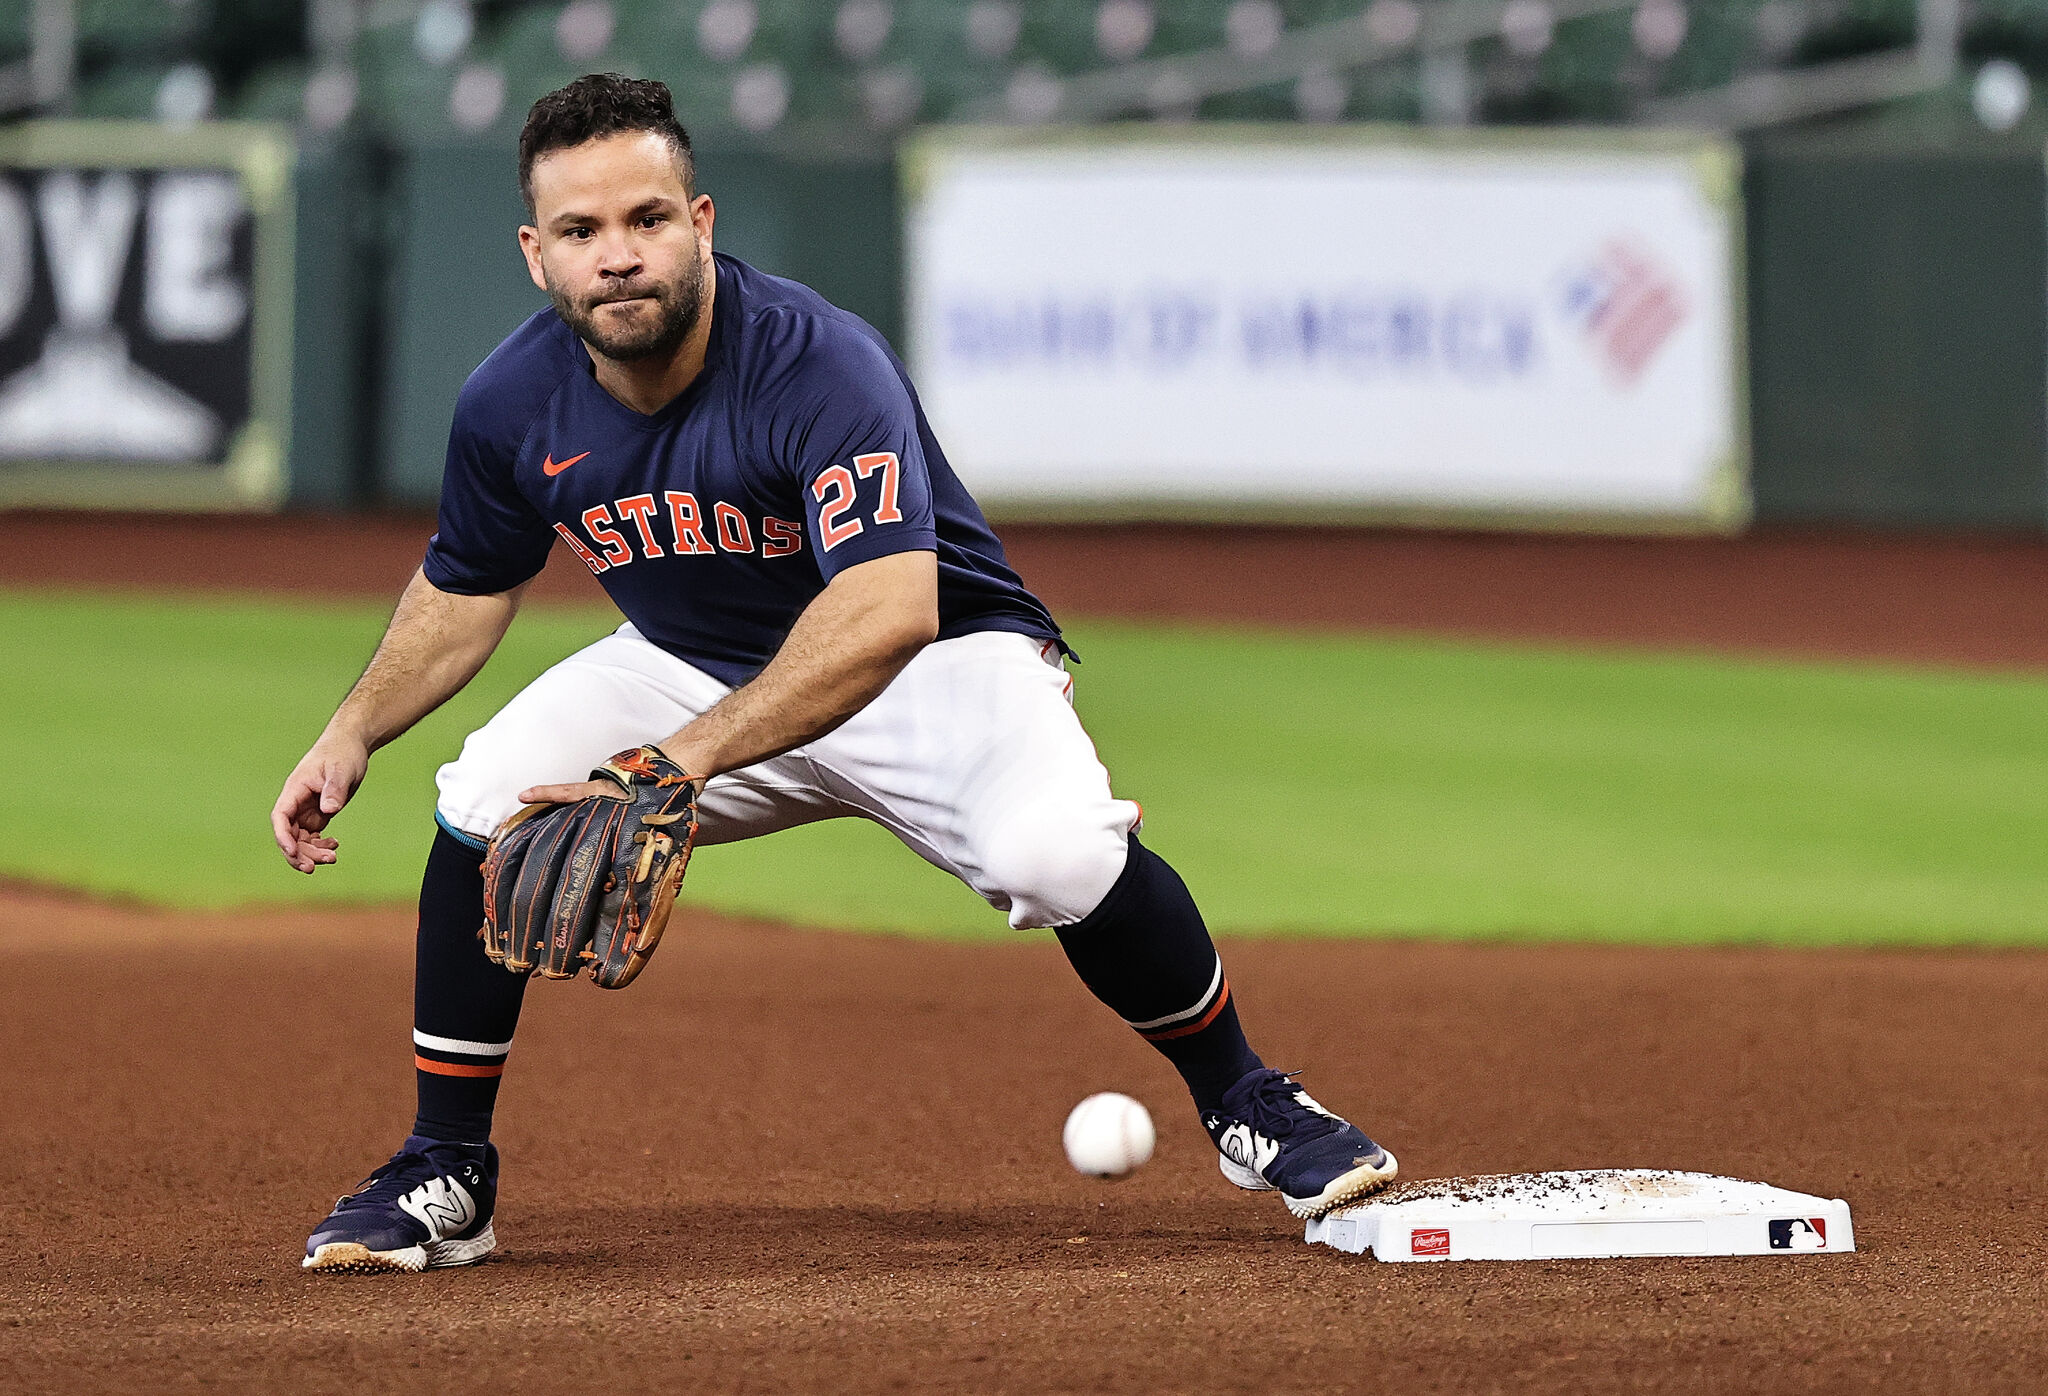 When Will Jose Altuve Return From The Injured List?